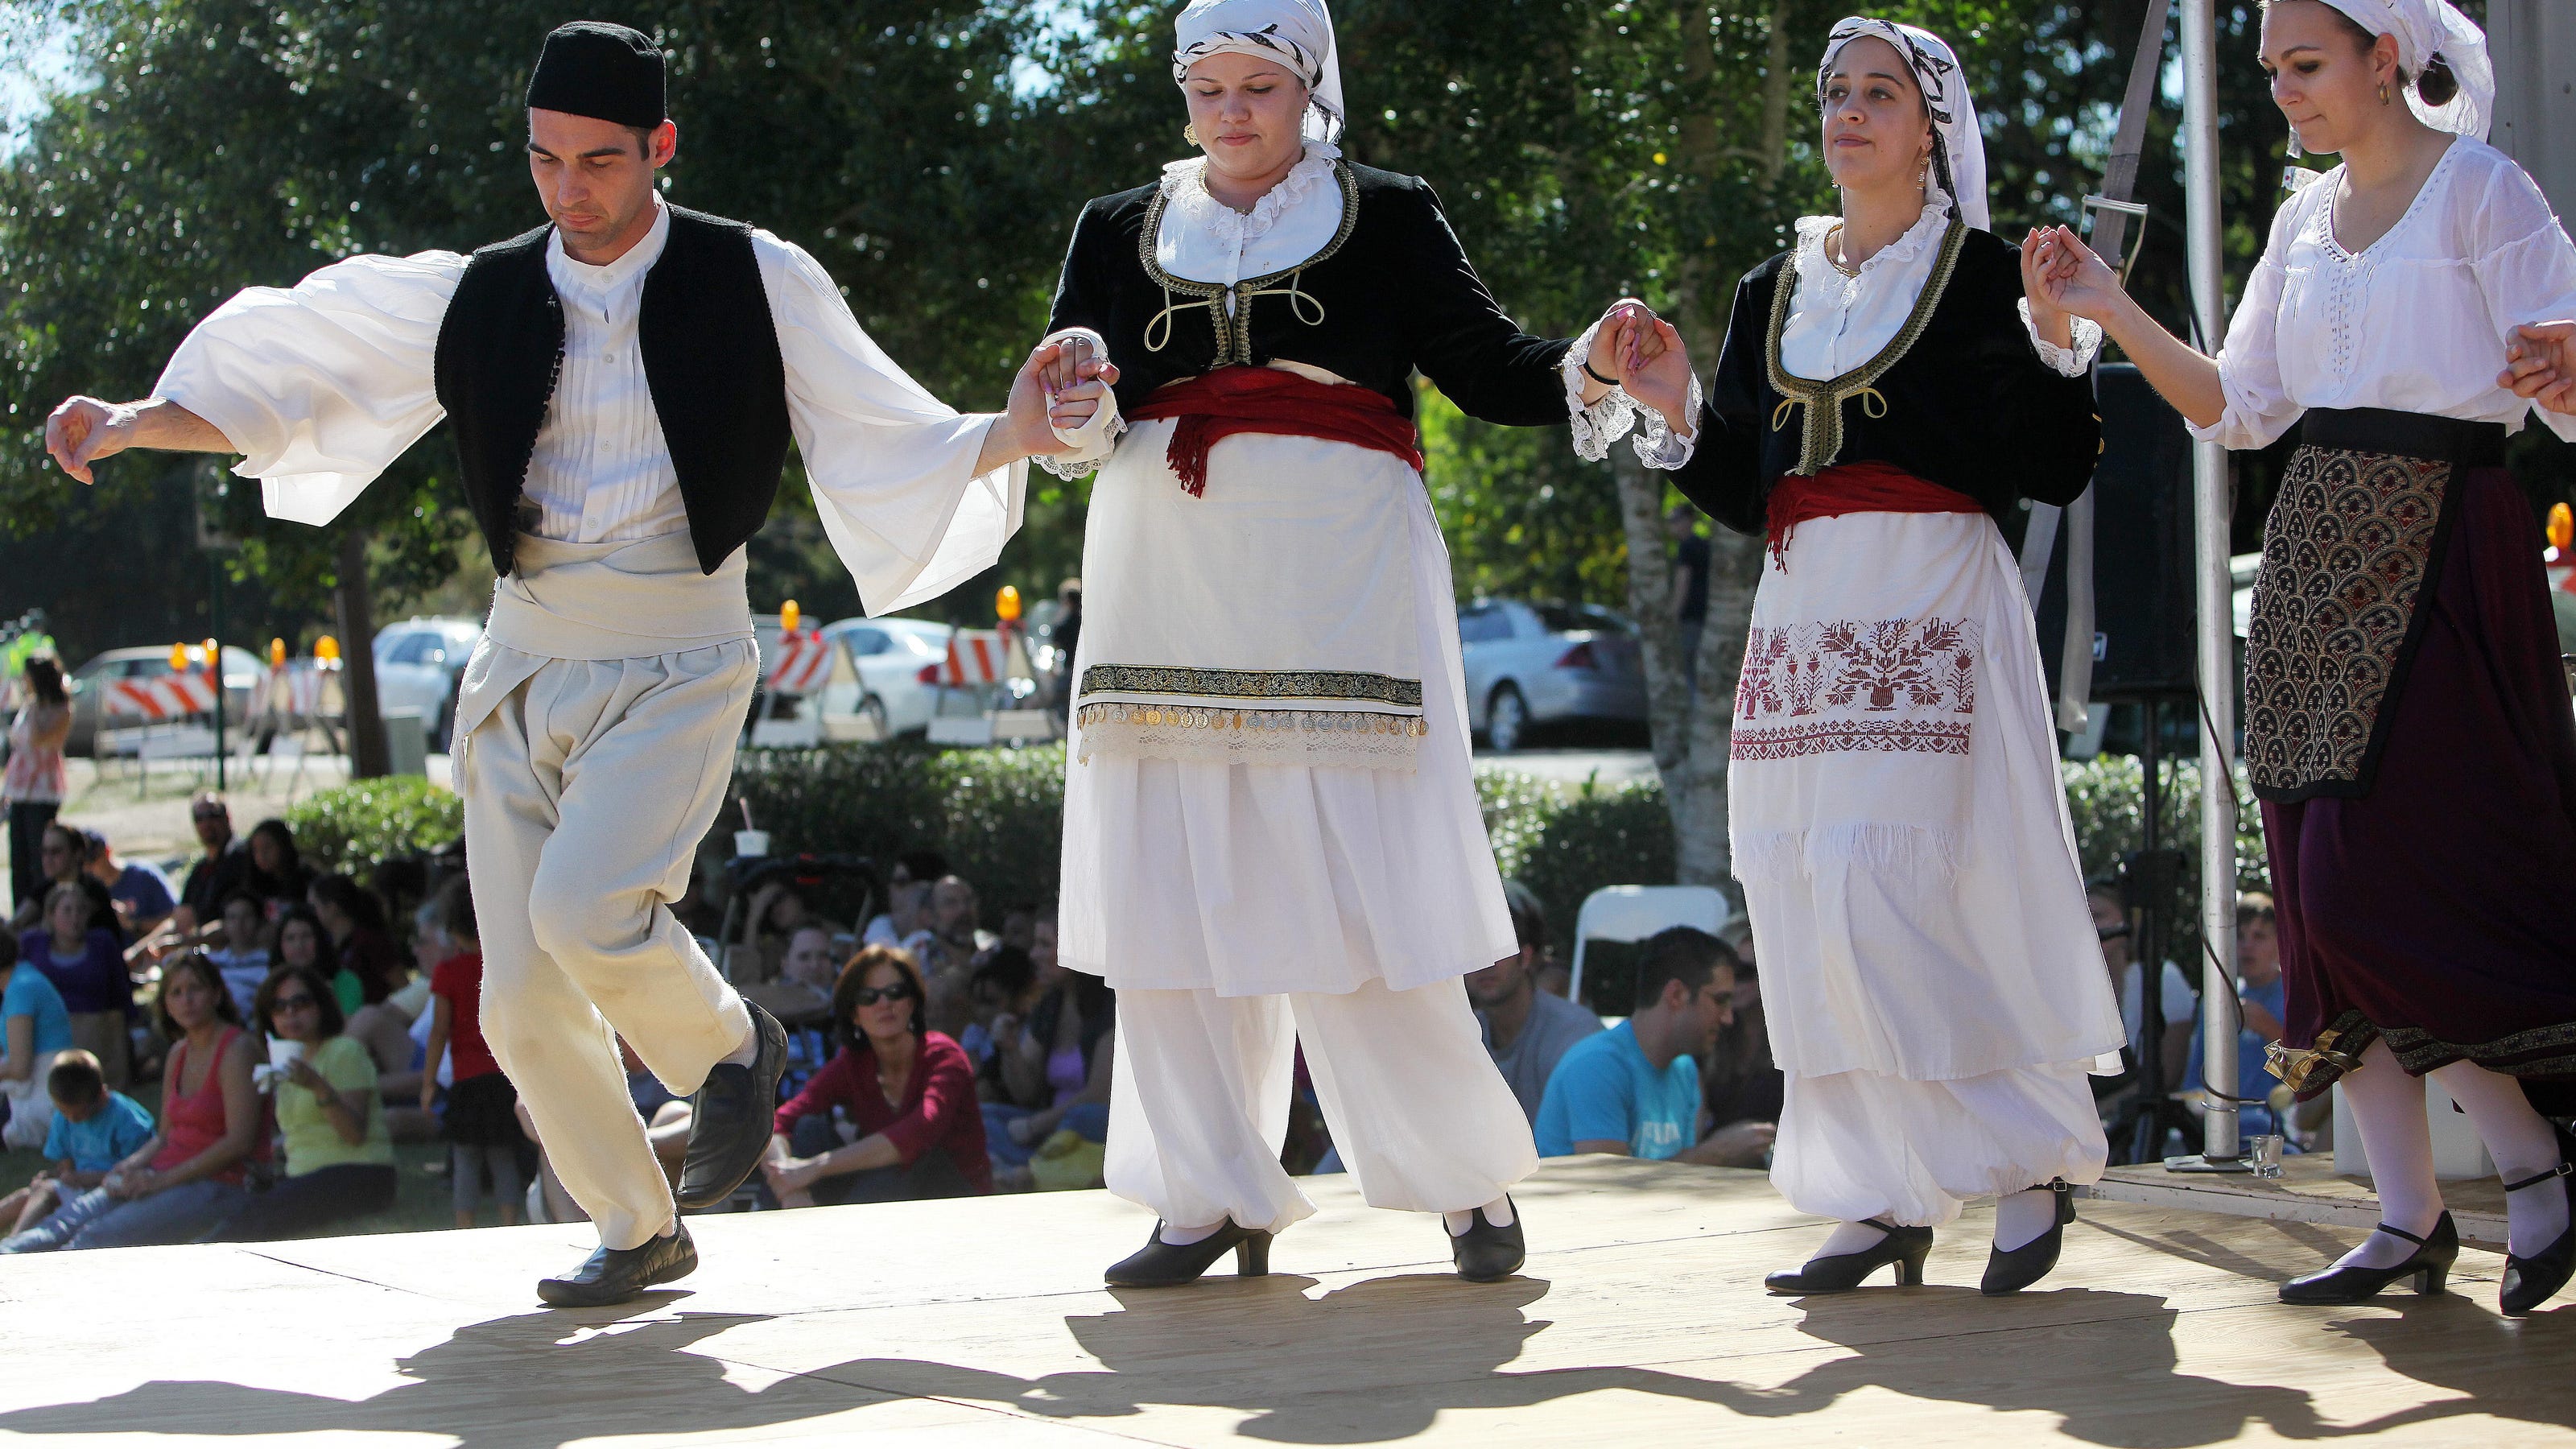 Greek Food Festival is back with gyros, dancing, music